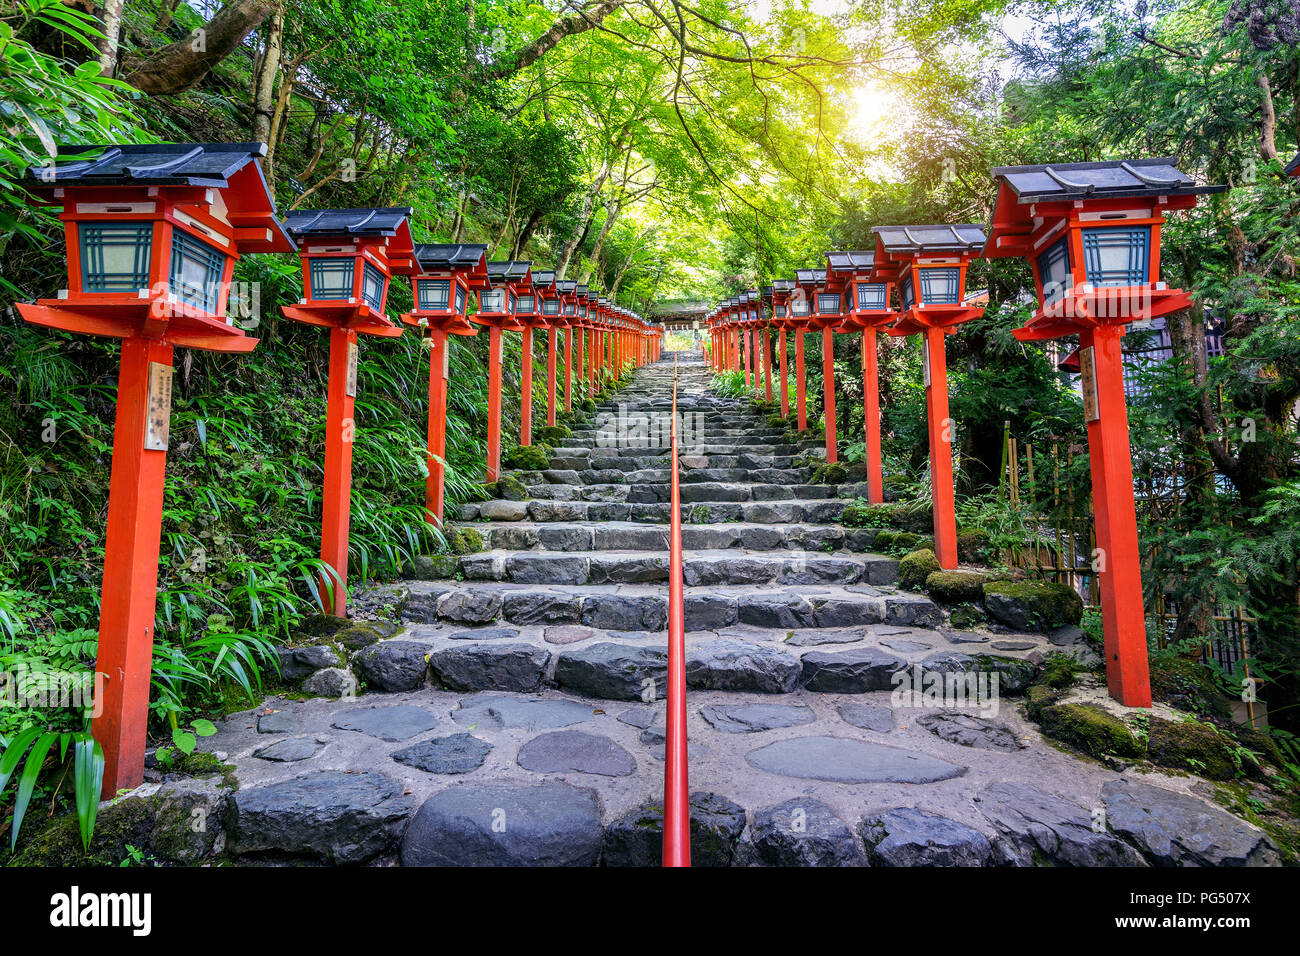 The red traditional light pole at Kifune shrine, Kyoto in Japan. Stock Photo